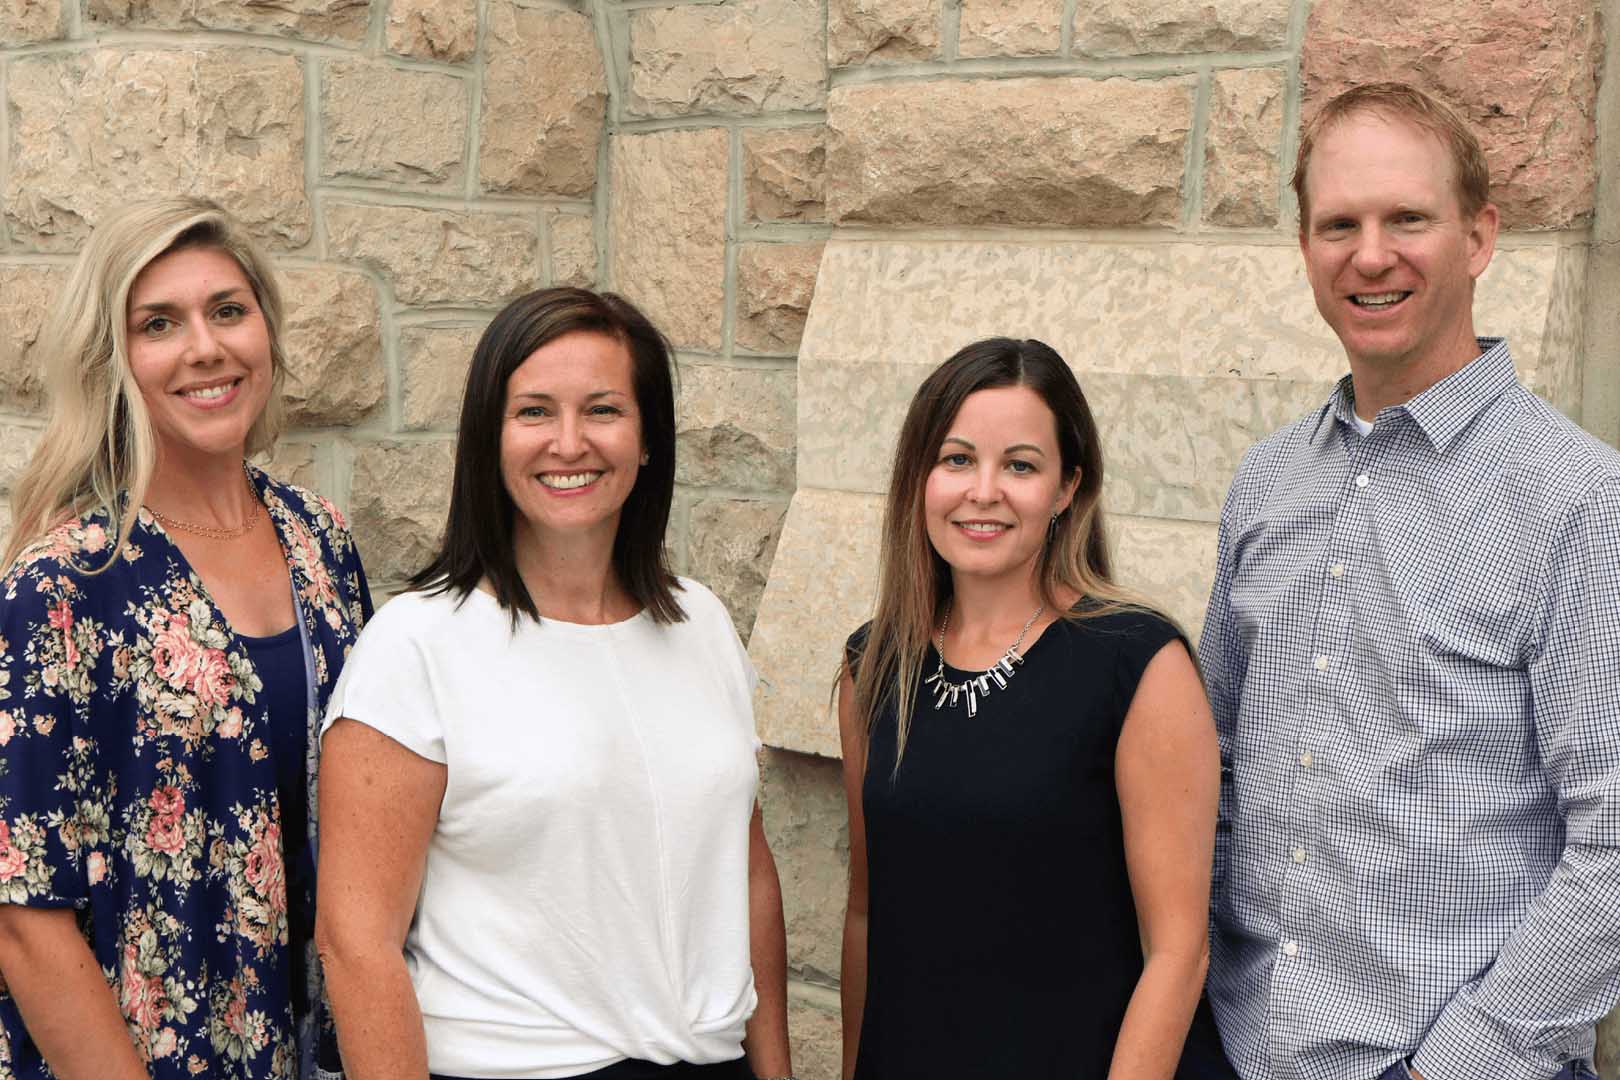 Jennafer Klemmer (RN), Patricia King (RN), Dr. Holly Mansell (PharmD), and Dr. Kerry Mansell (PharmD) are part of the University of Saskatchewan team that recently developed cannabis education resources targeted toward youth in grades seven and nine. Photo by Reagan King.